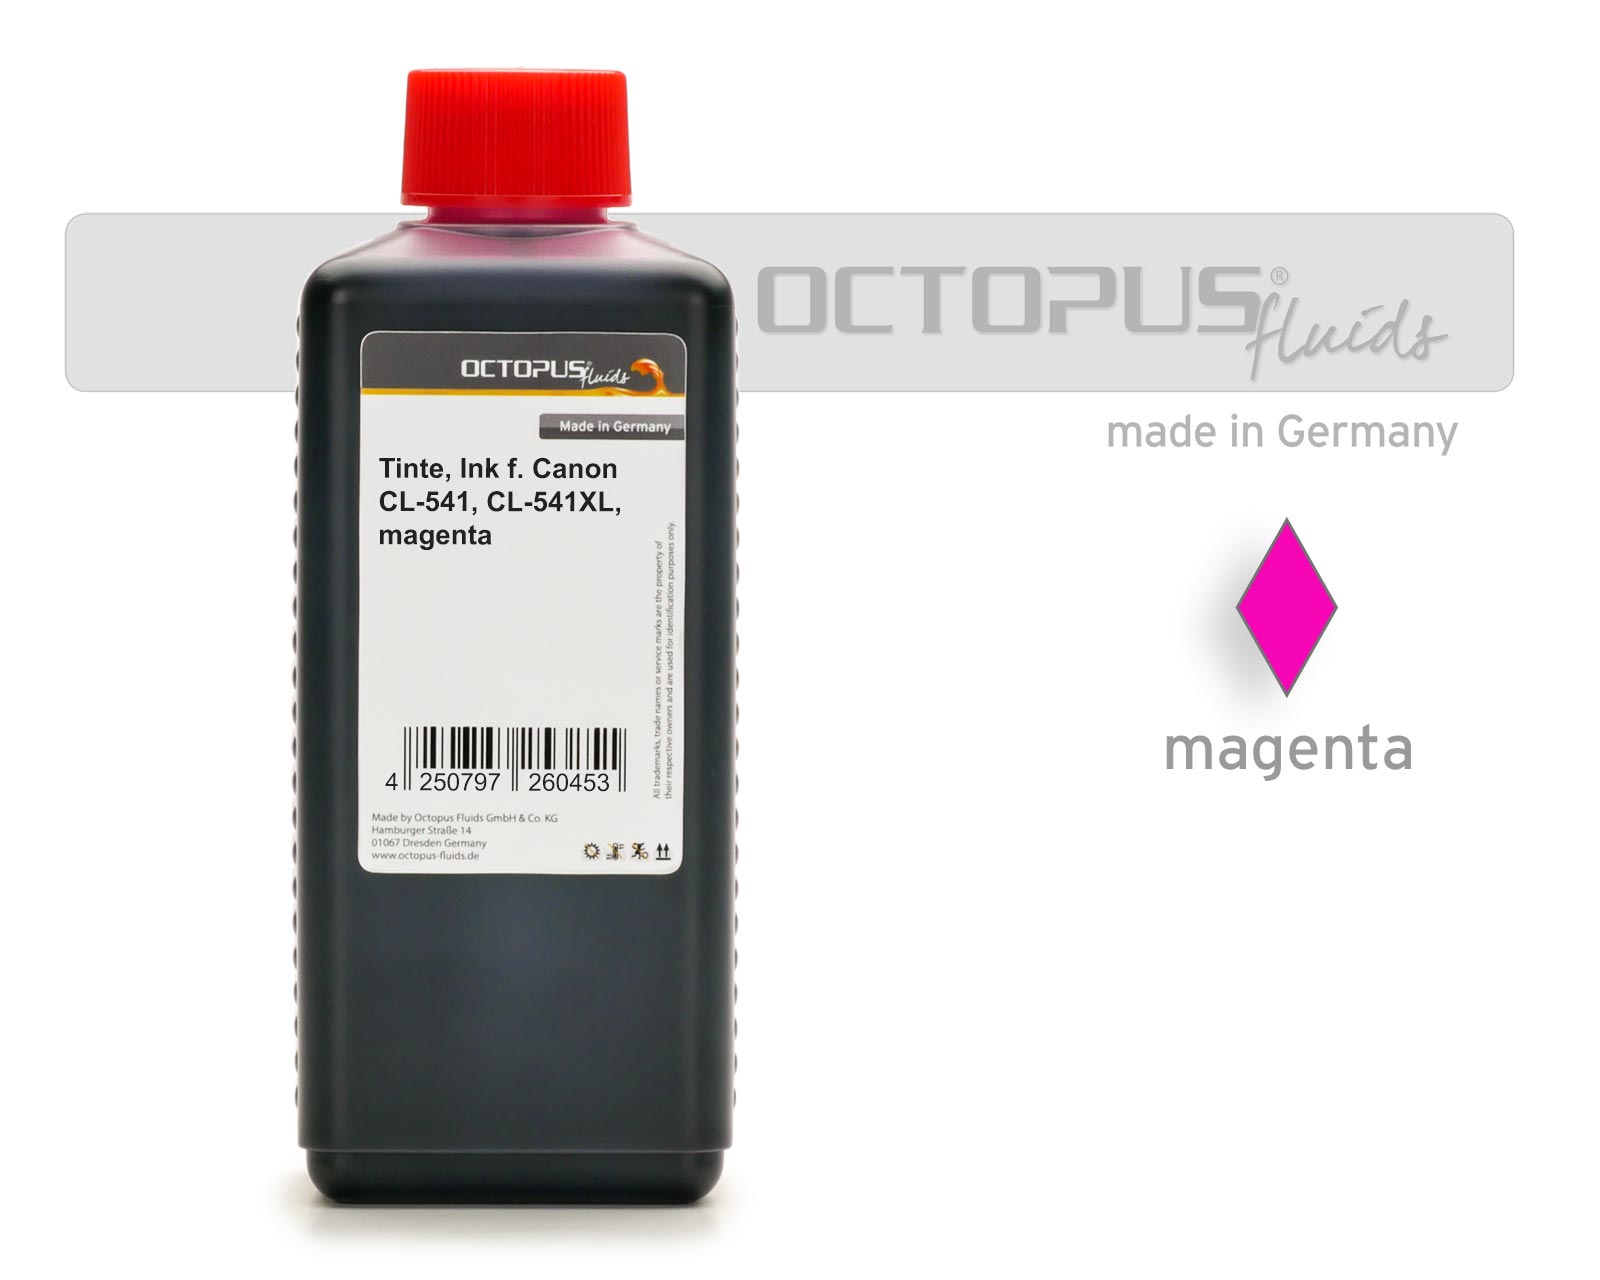 Octopus Ink for Canon CL-541, CL-541XL magenta